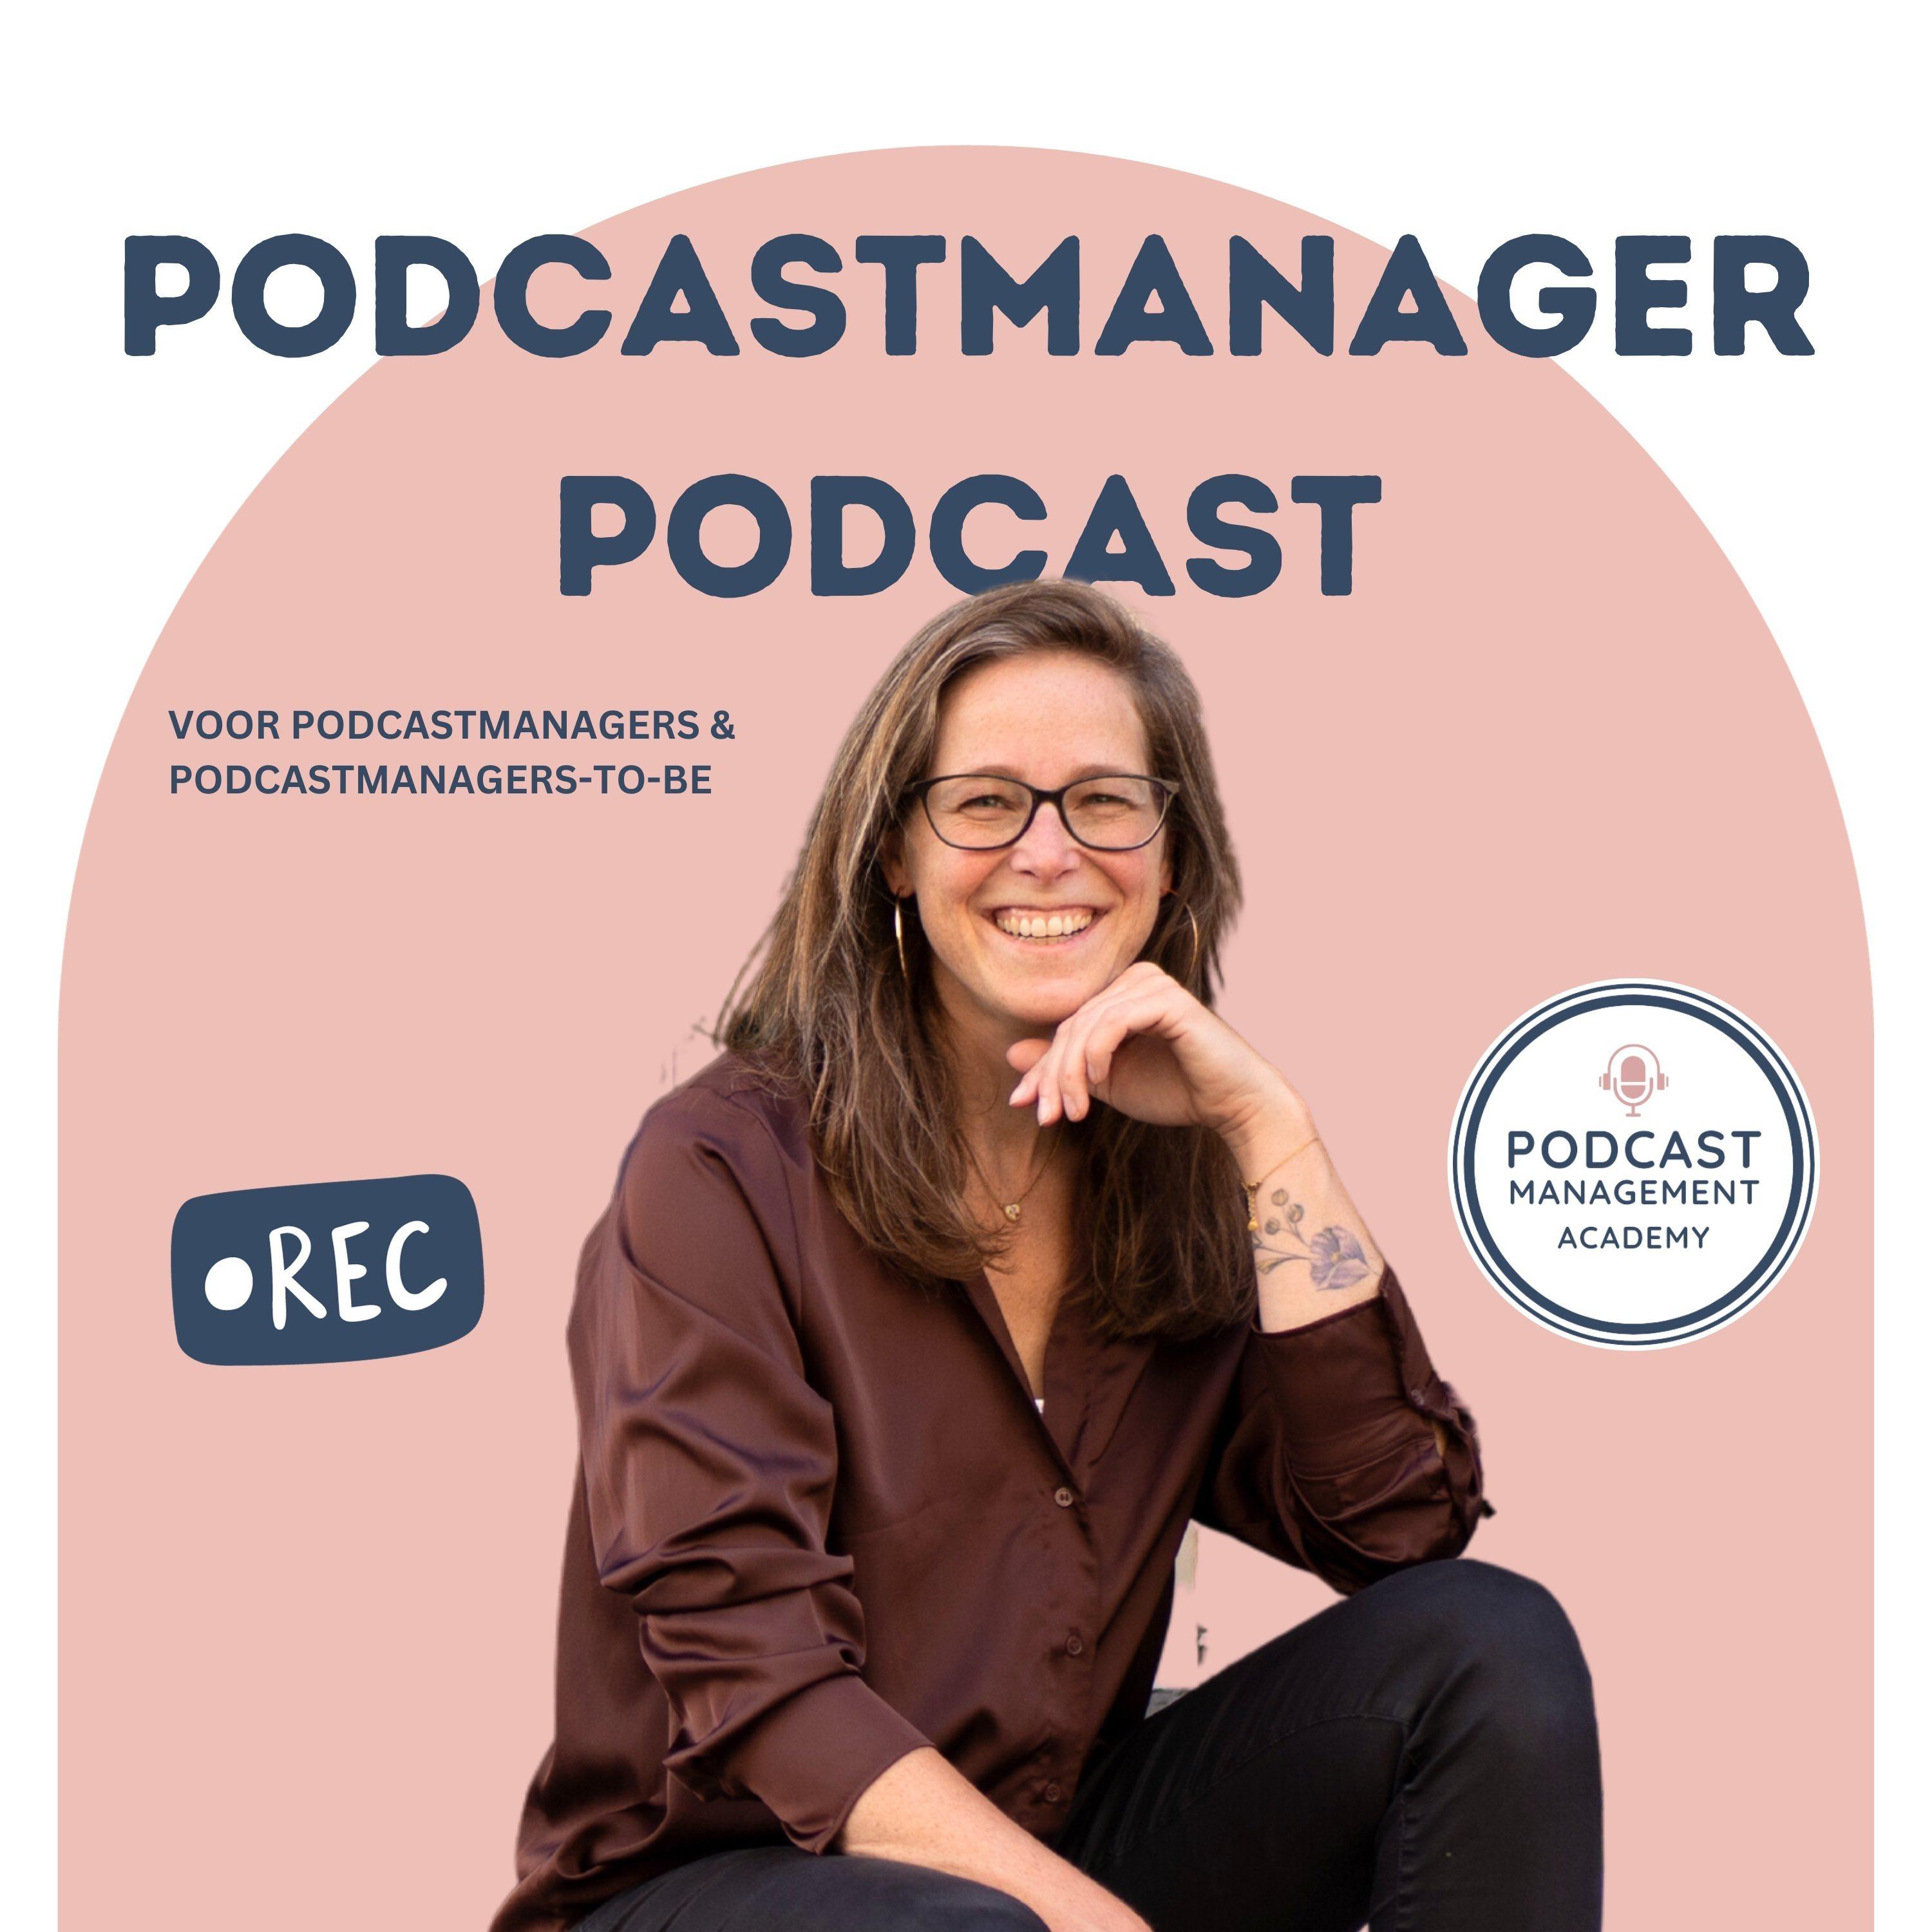 Podcastmanager Podcast